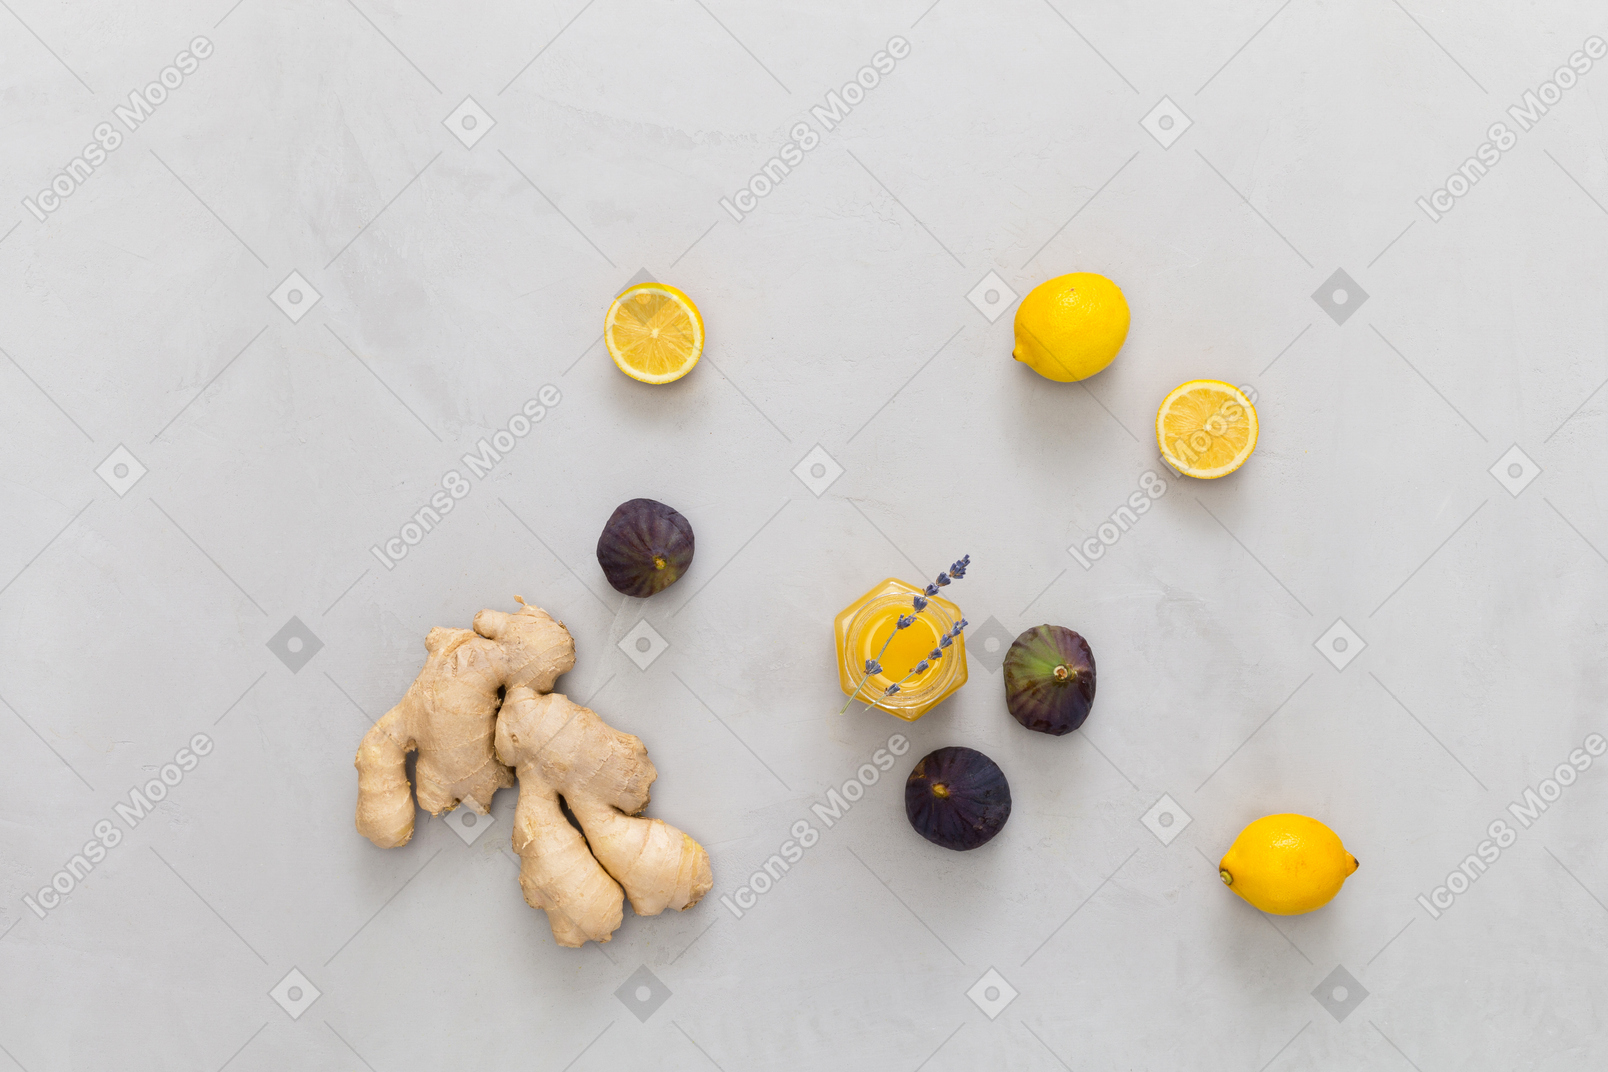 Ginger, lemons, figs and dried twig